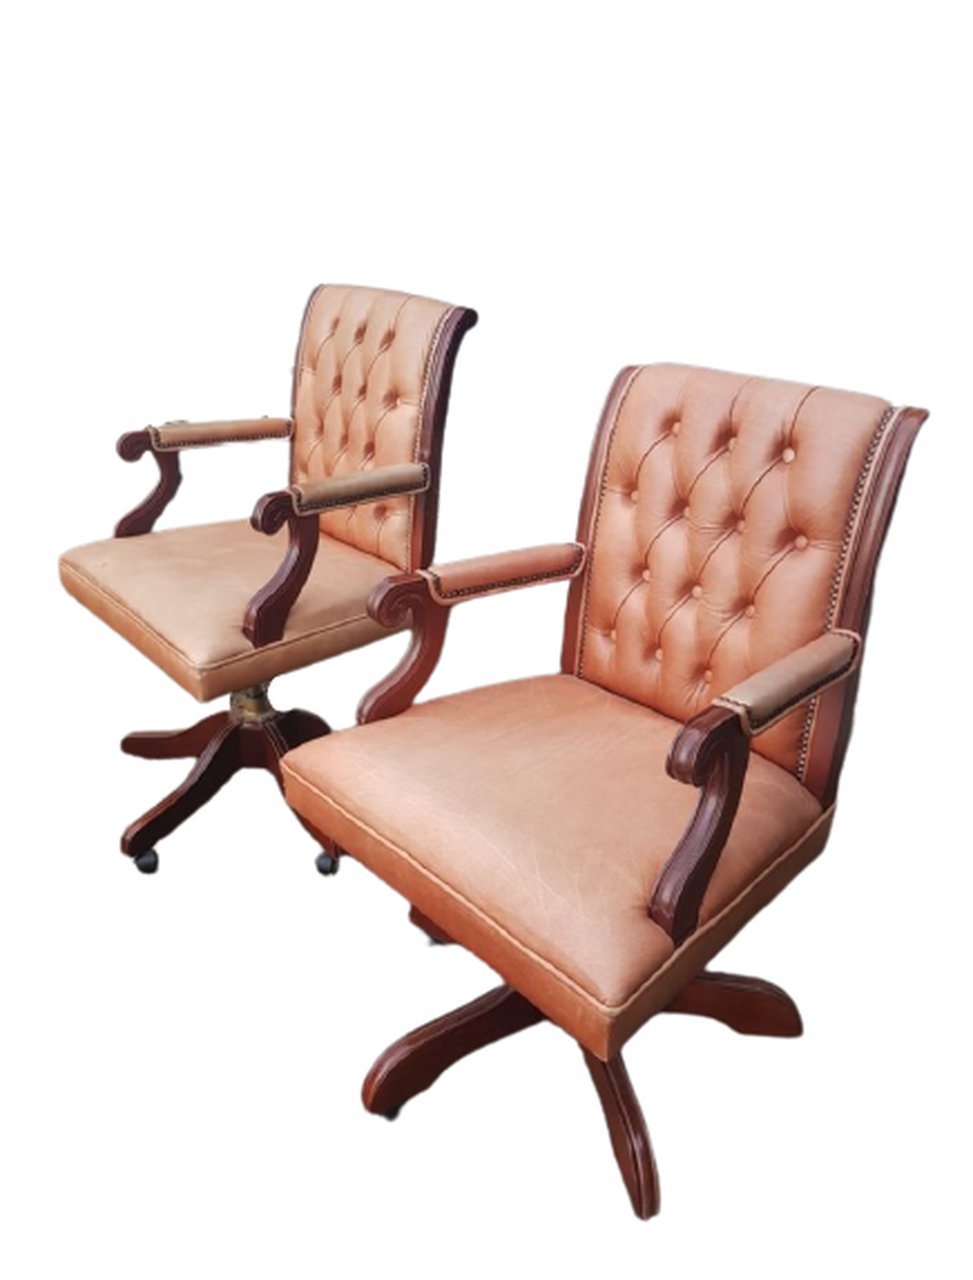 2 Original Chesterfield leather office chairs "President"